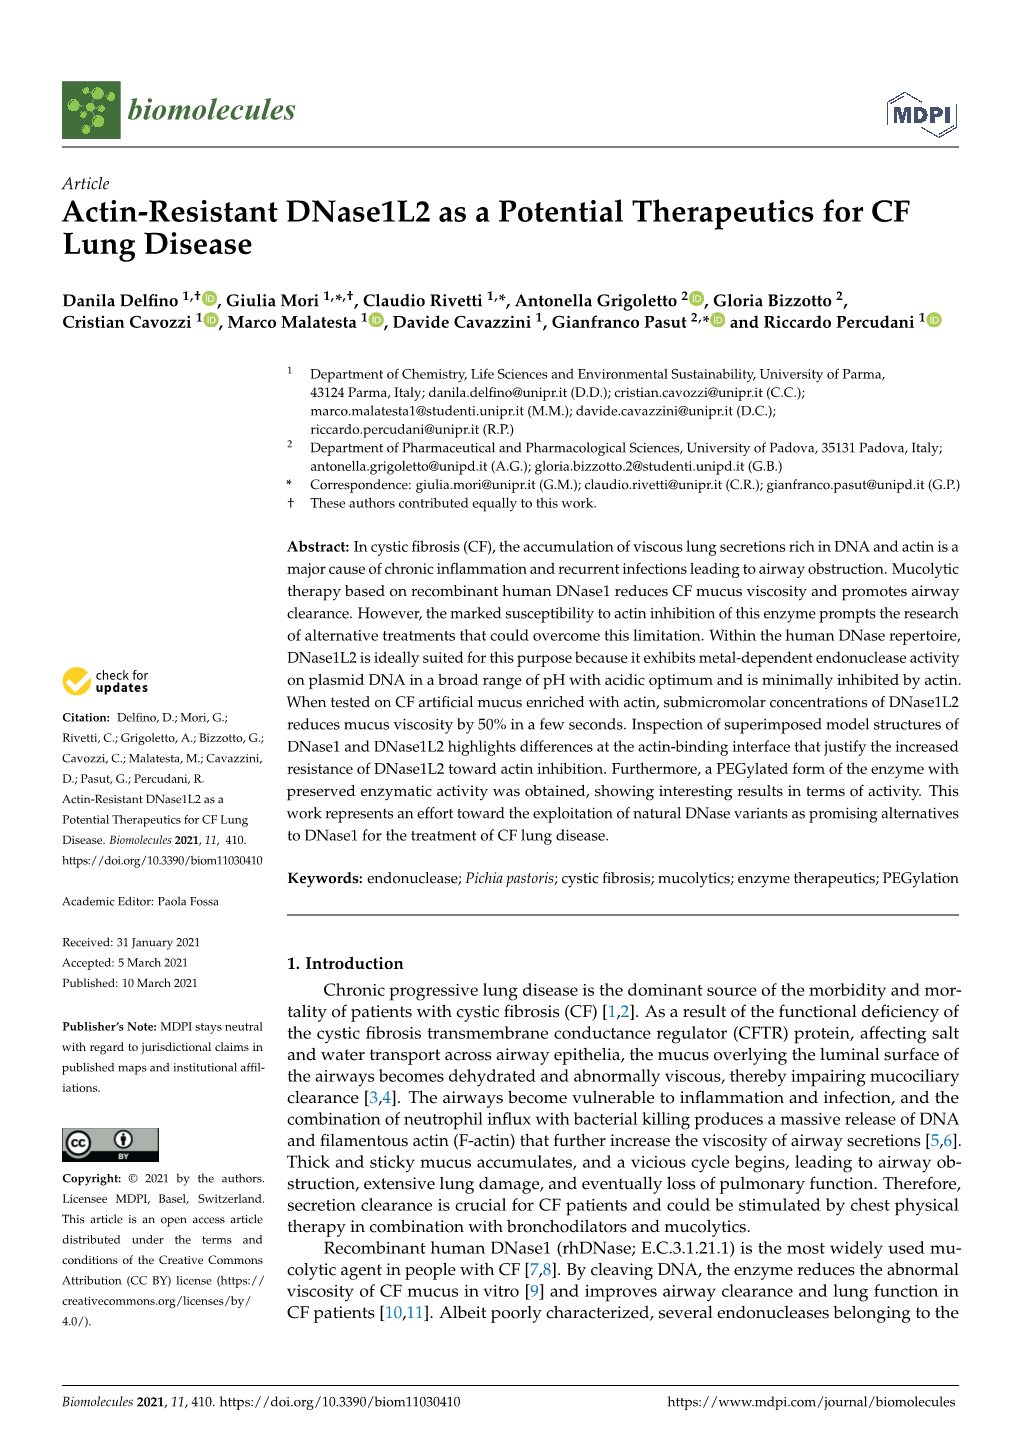 Actin-Resistant Dnase1l2 As a Potential Therapeutics for CF Lung Disease